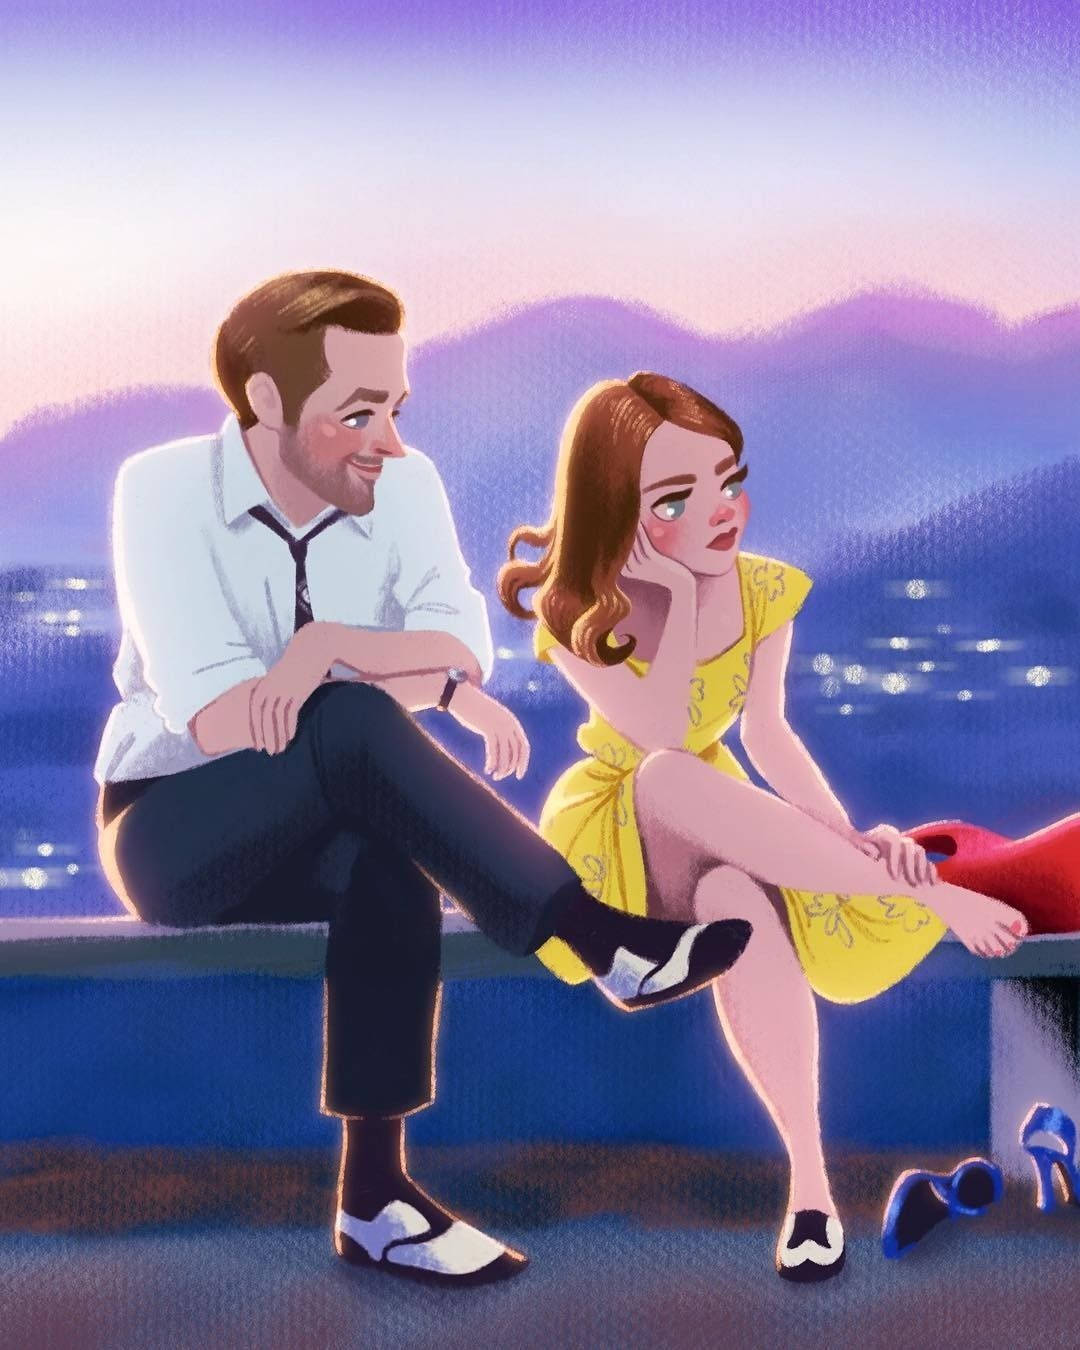 Cute Cartoon Couple Sitting Together Wallpaper